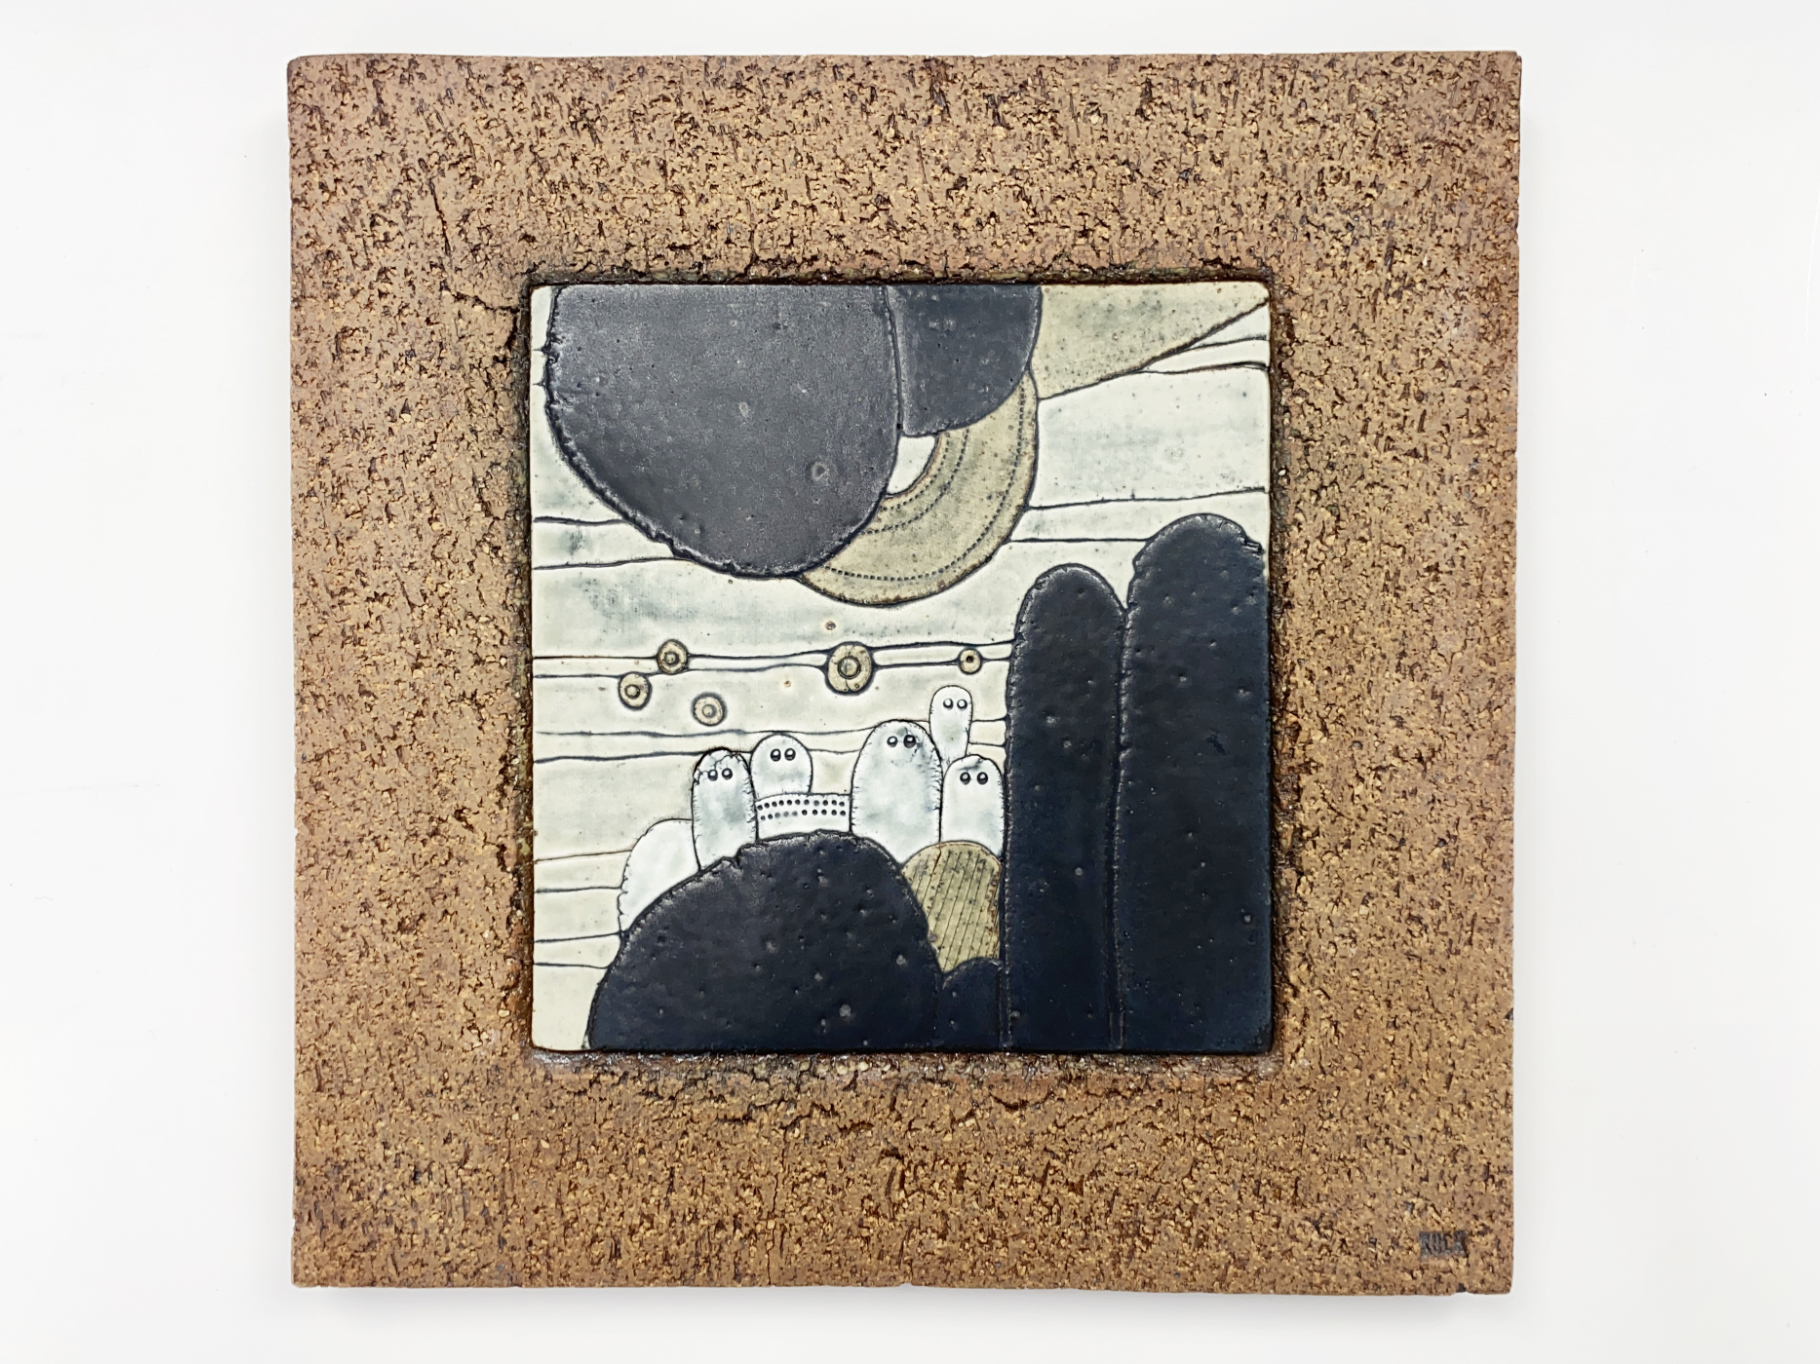 Wall-Plate, Ceramic, Stoneware, Unique Piece, abstract Motif, Overmolding of different colored Clays, by Wilhelm & Elly Kuch, ca 1985